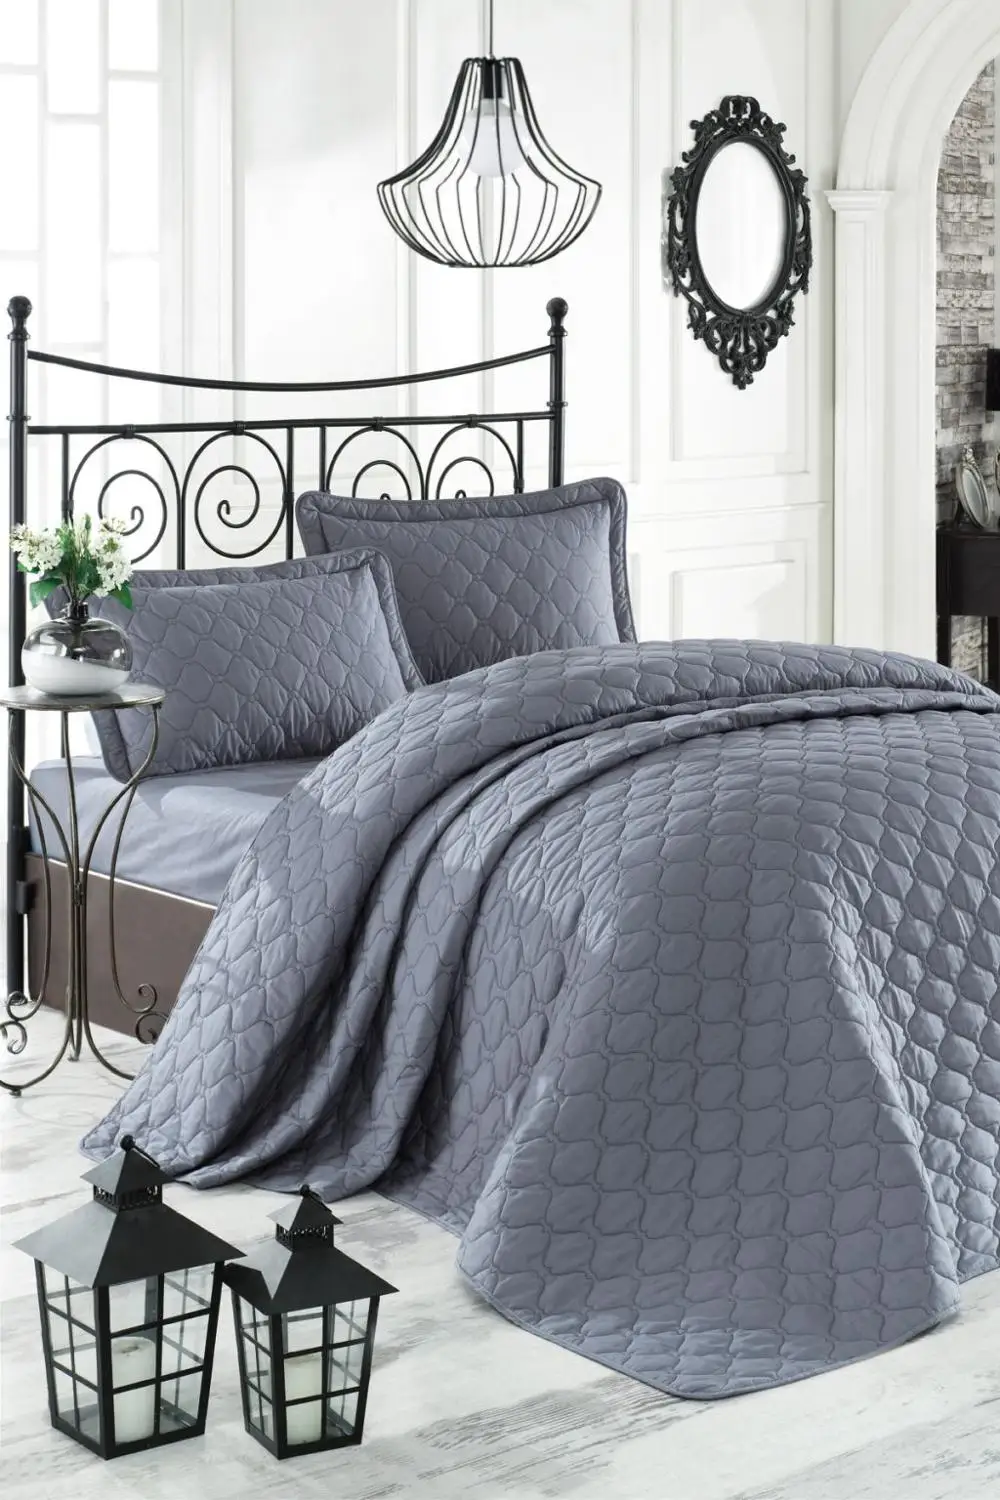 100% turkish cotton bedspread bedding set bedspread and pillow case quilting luxury bed covers bed linen anthracite solid color